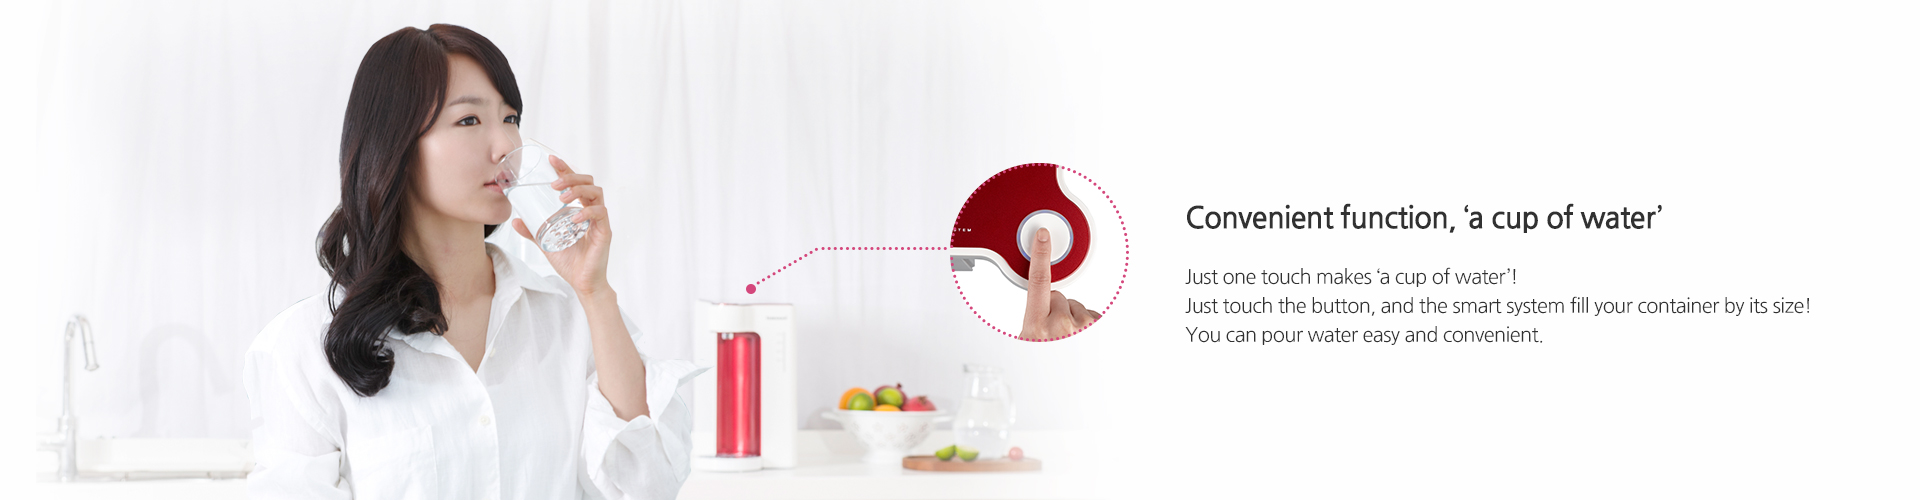 Convenient function, ‘a cup of water’,Just one touch makes ‘a cup of water’!Just touch the button, and the smart system fill your container by its size!You can pour water easy and convenient.